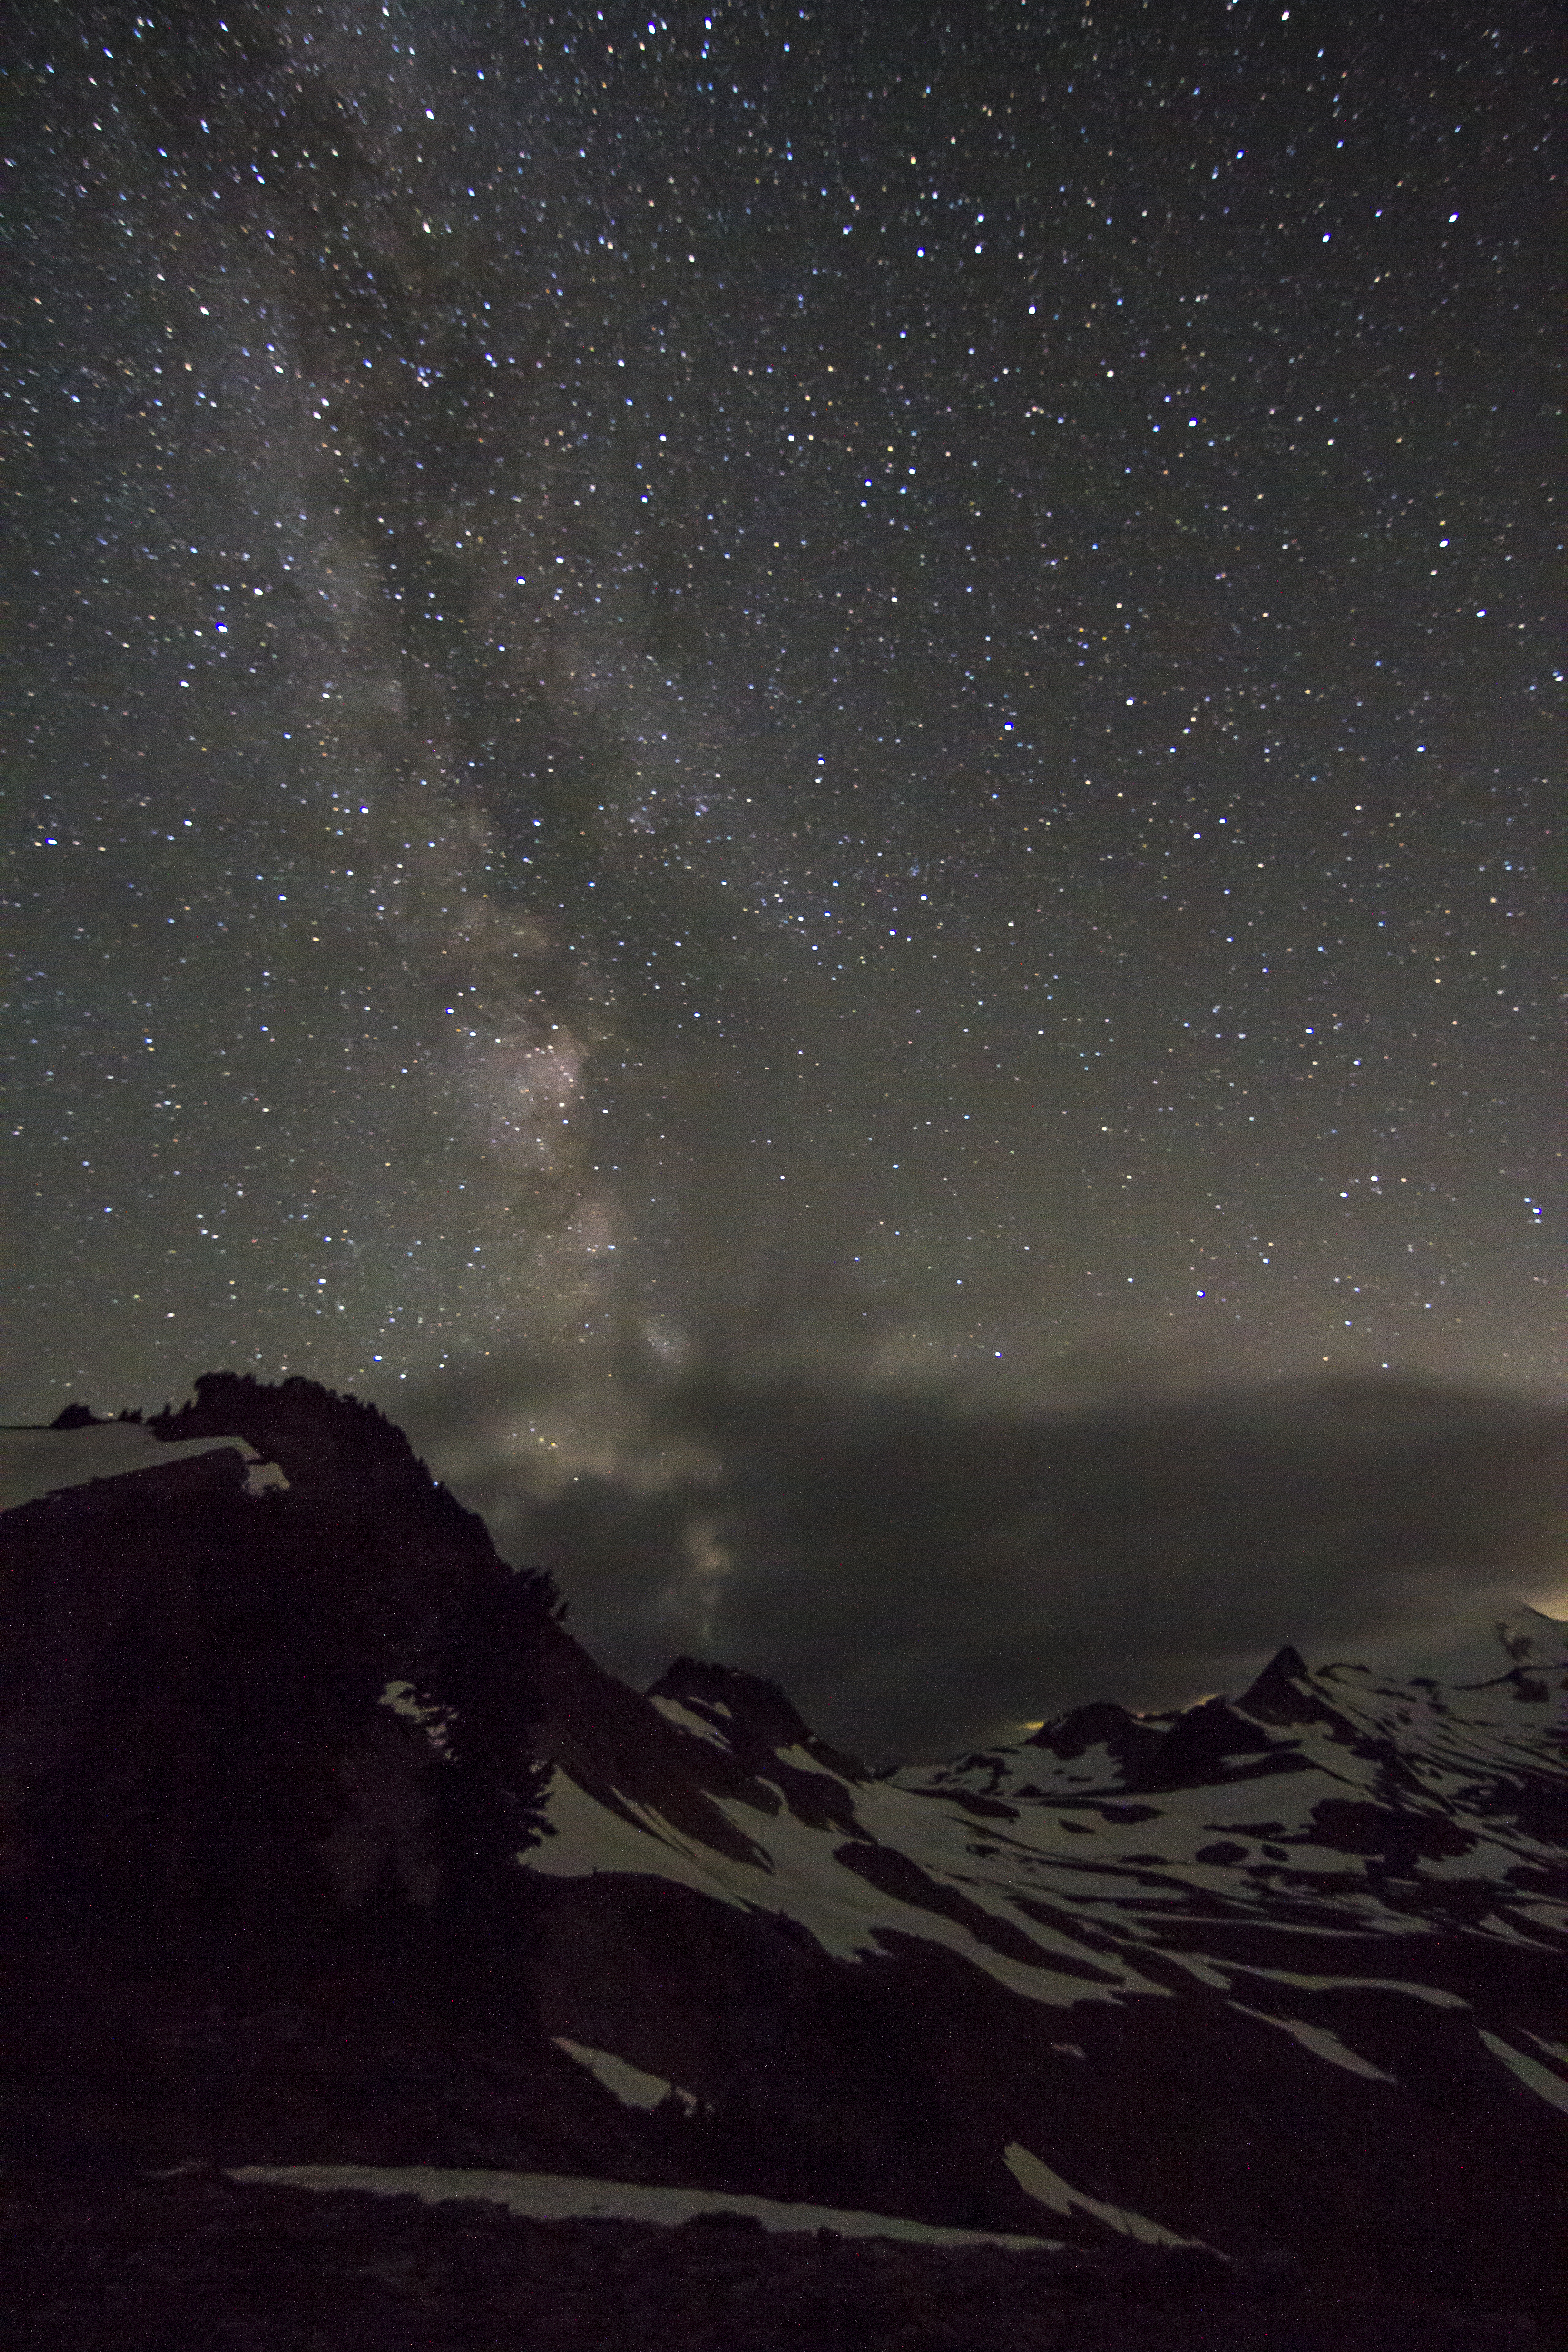 A panoramic shot of a snow covered mountain beneath the night sky. The sky is illuminated with thousands of stars, and you can see an arm of the Milky Way